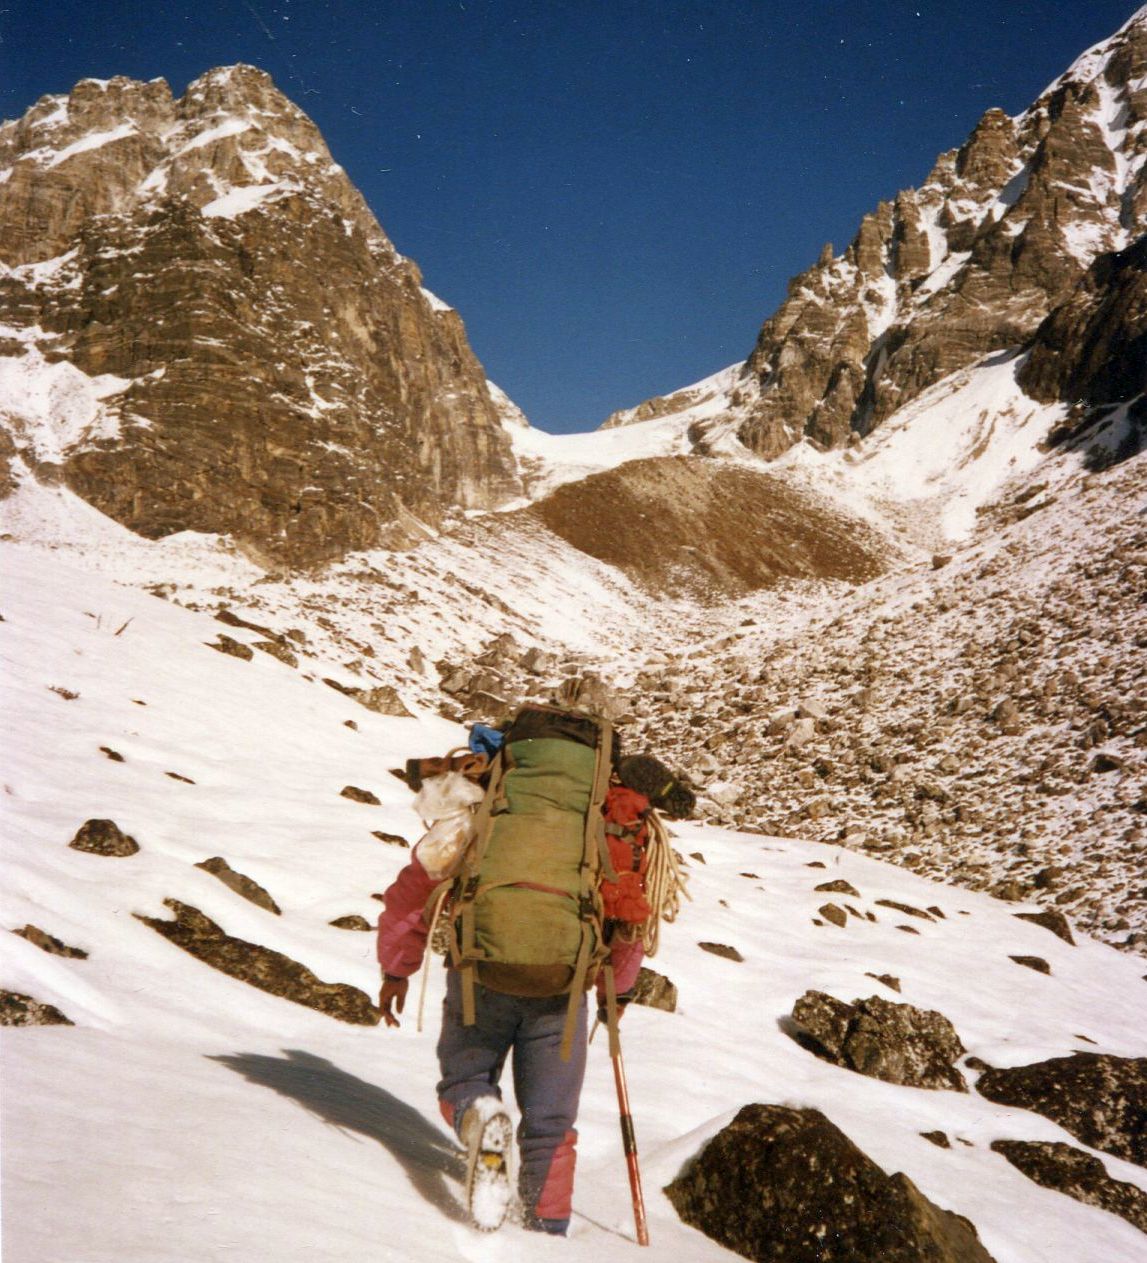 Ascent to Ice-fall on Balephi Glacier